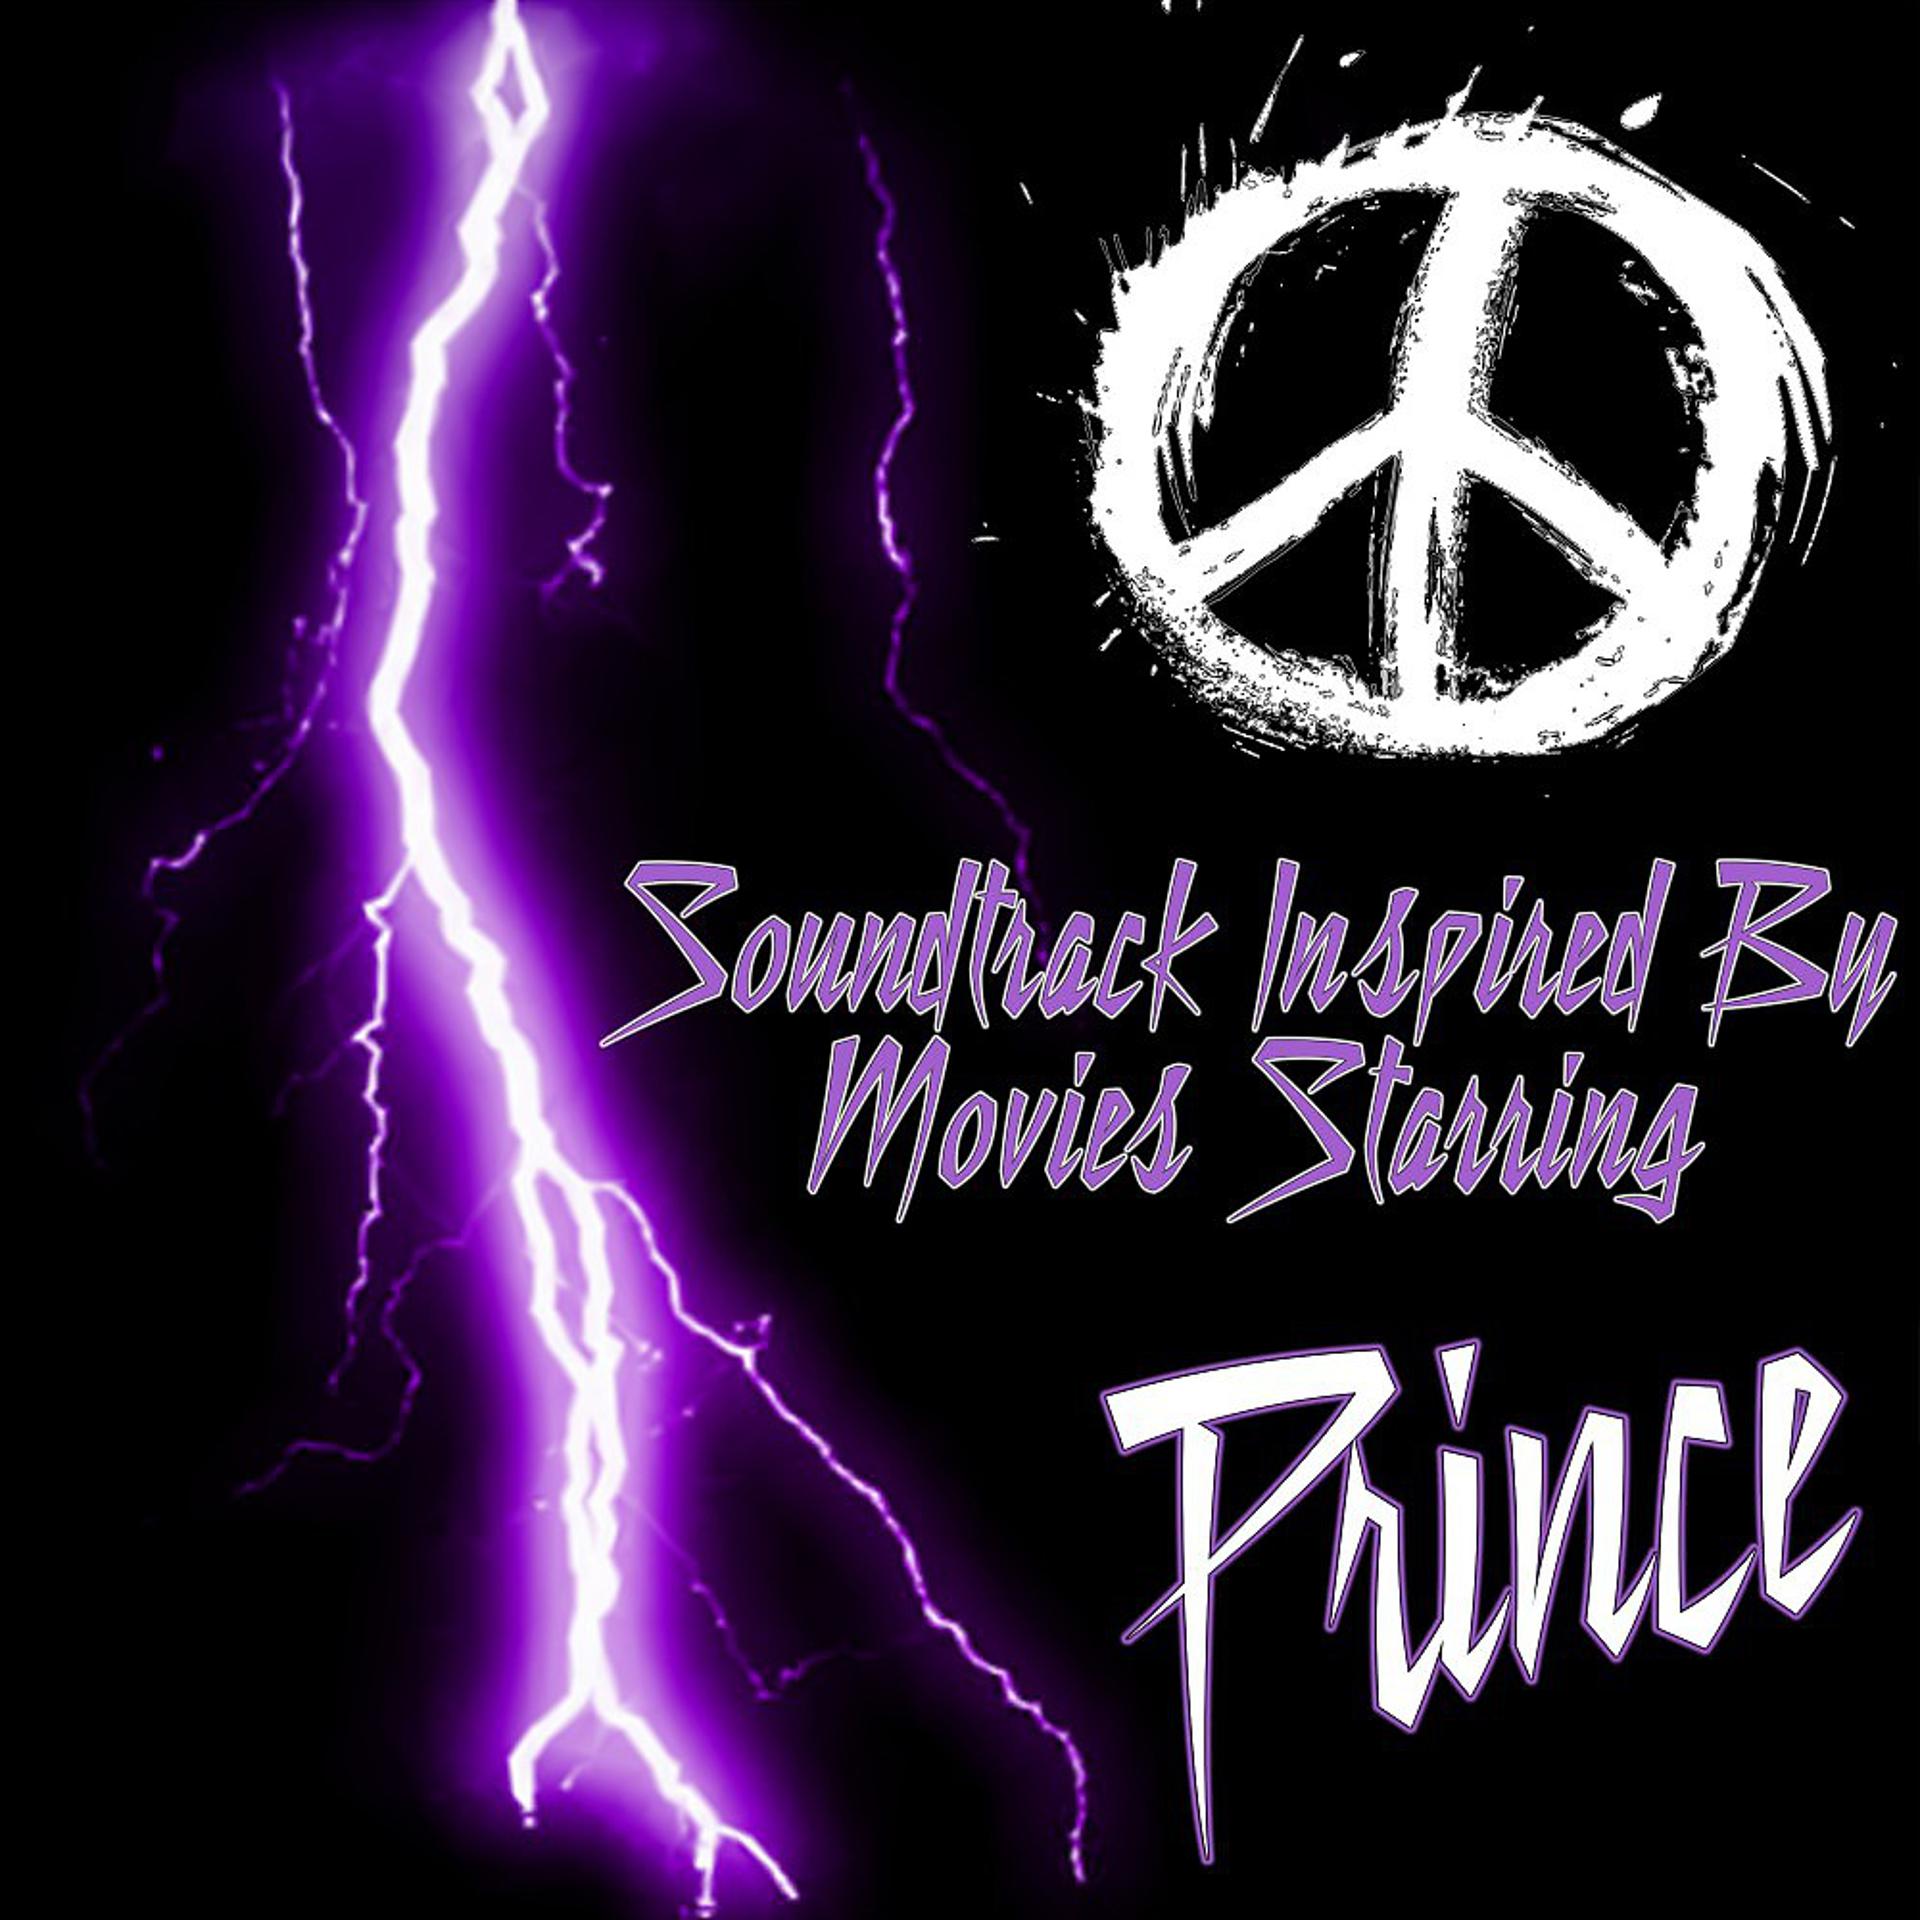 Постер альбома Soundtrack Inspired by Movies Starring Prince